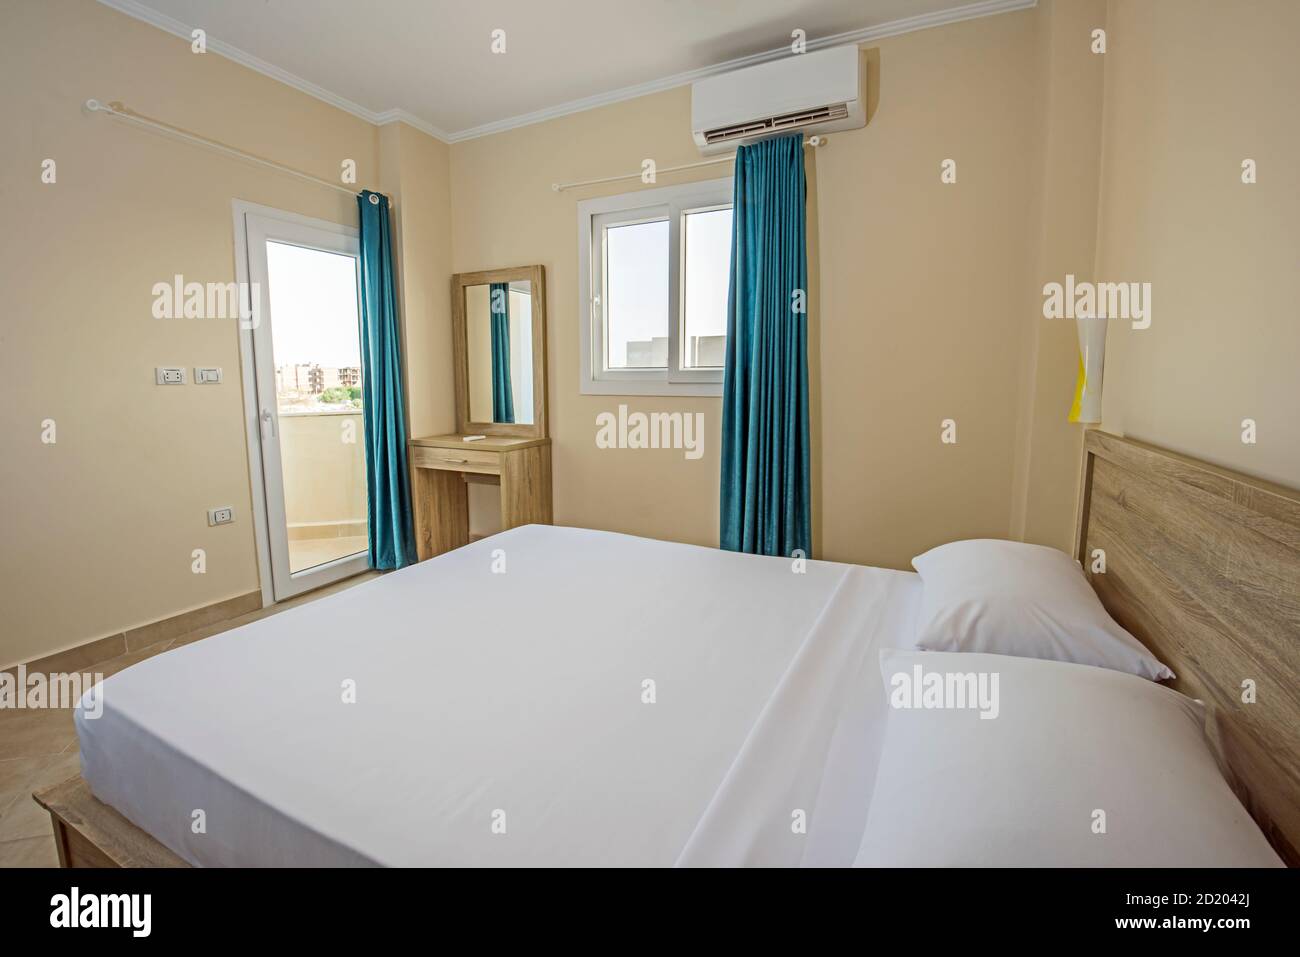 Interior design decor furnishing of luxury show home bedroom showing furniture and double bed with balcony Stock Photo